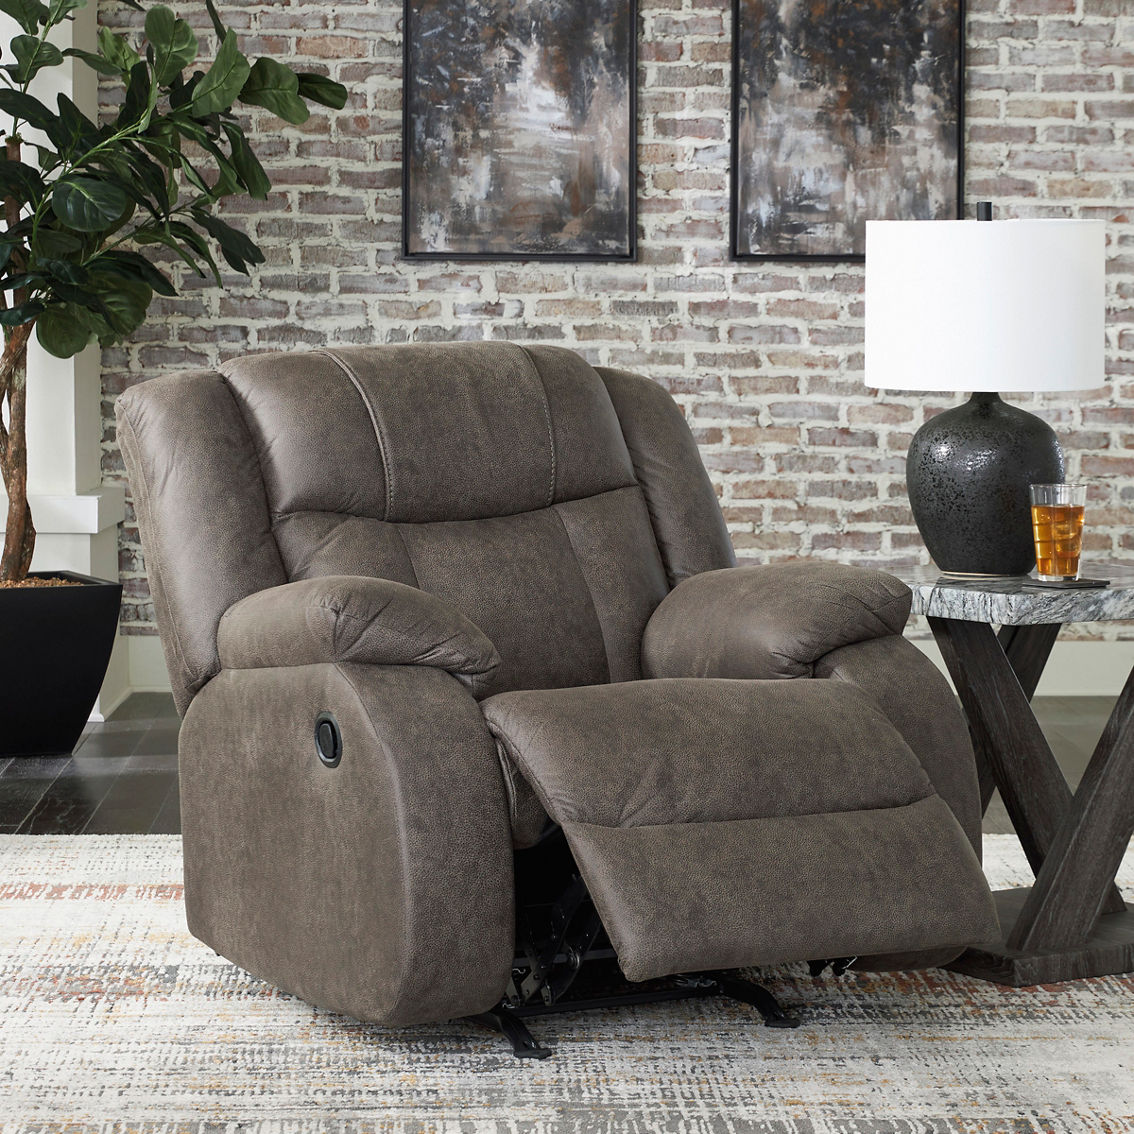 Signature Design by Ashley First Base 3 pc. Reclining Set: Sofa, Loveseat, Recliner - Image 4 of 4